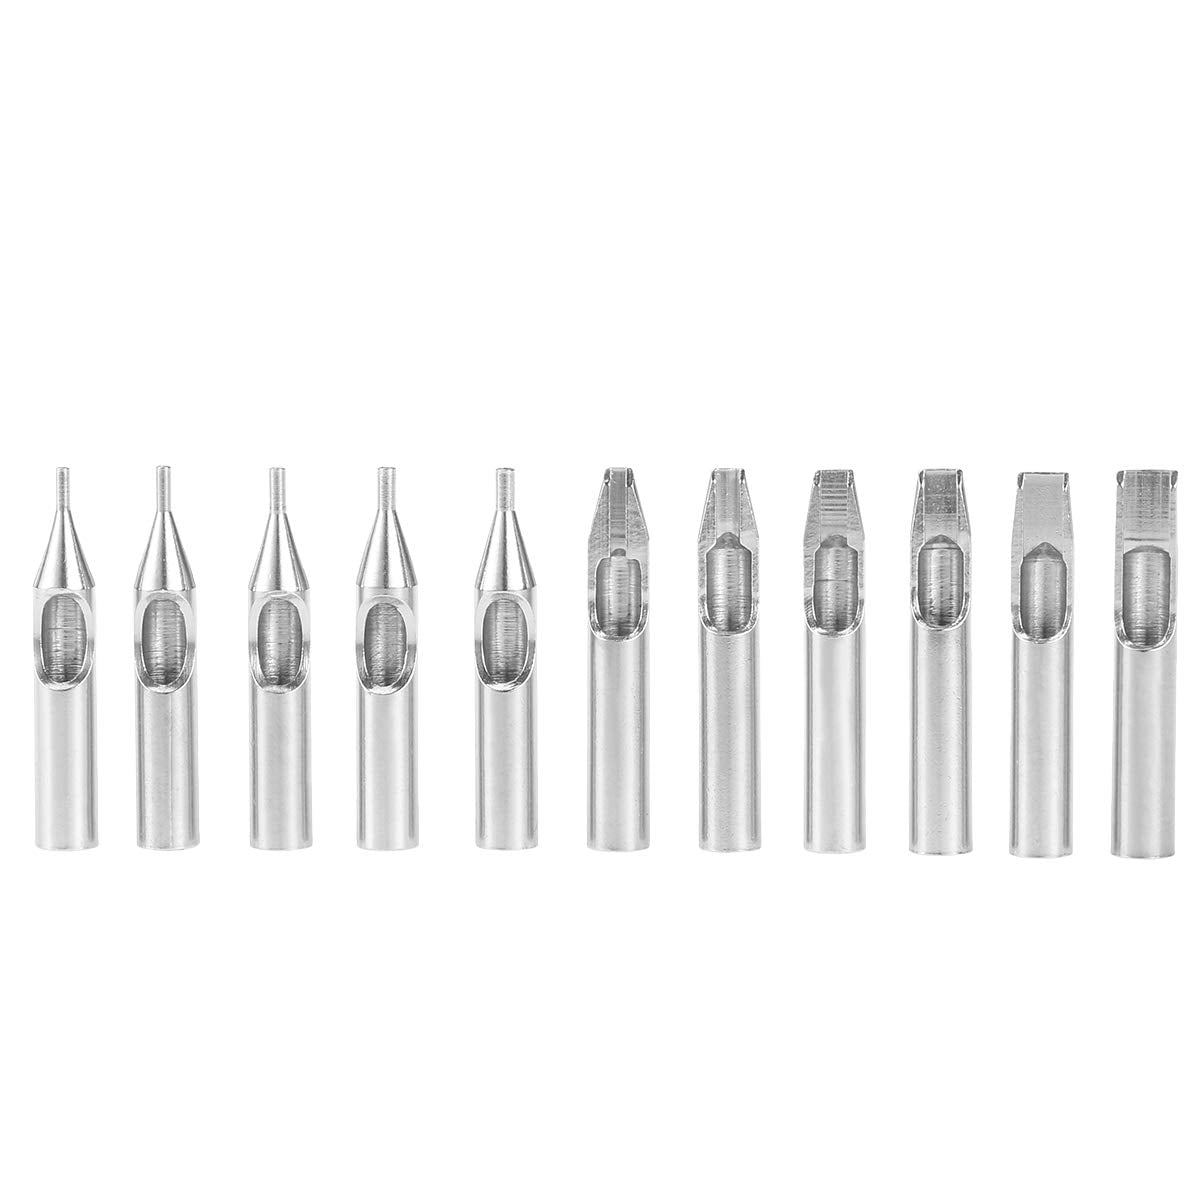 Amazon.com: Kwadron Cartridge Tattoo Needles Cartridges, Box of 20, Round  Liners Long Taper TEXTURED - 1 Round Liner Long Taper - 35/1RLLT-T : Beauty  & Personal Care